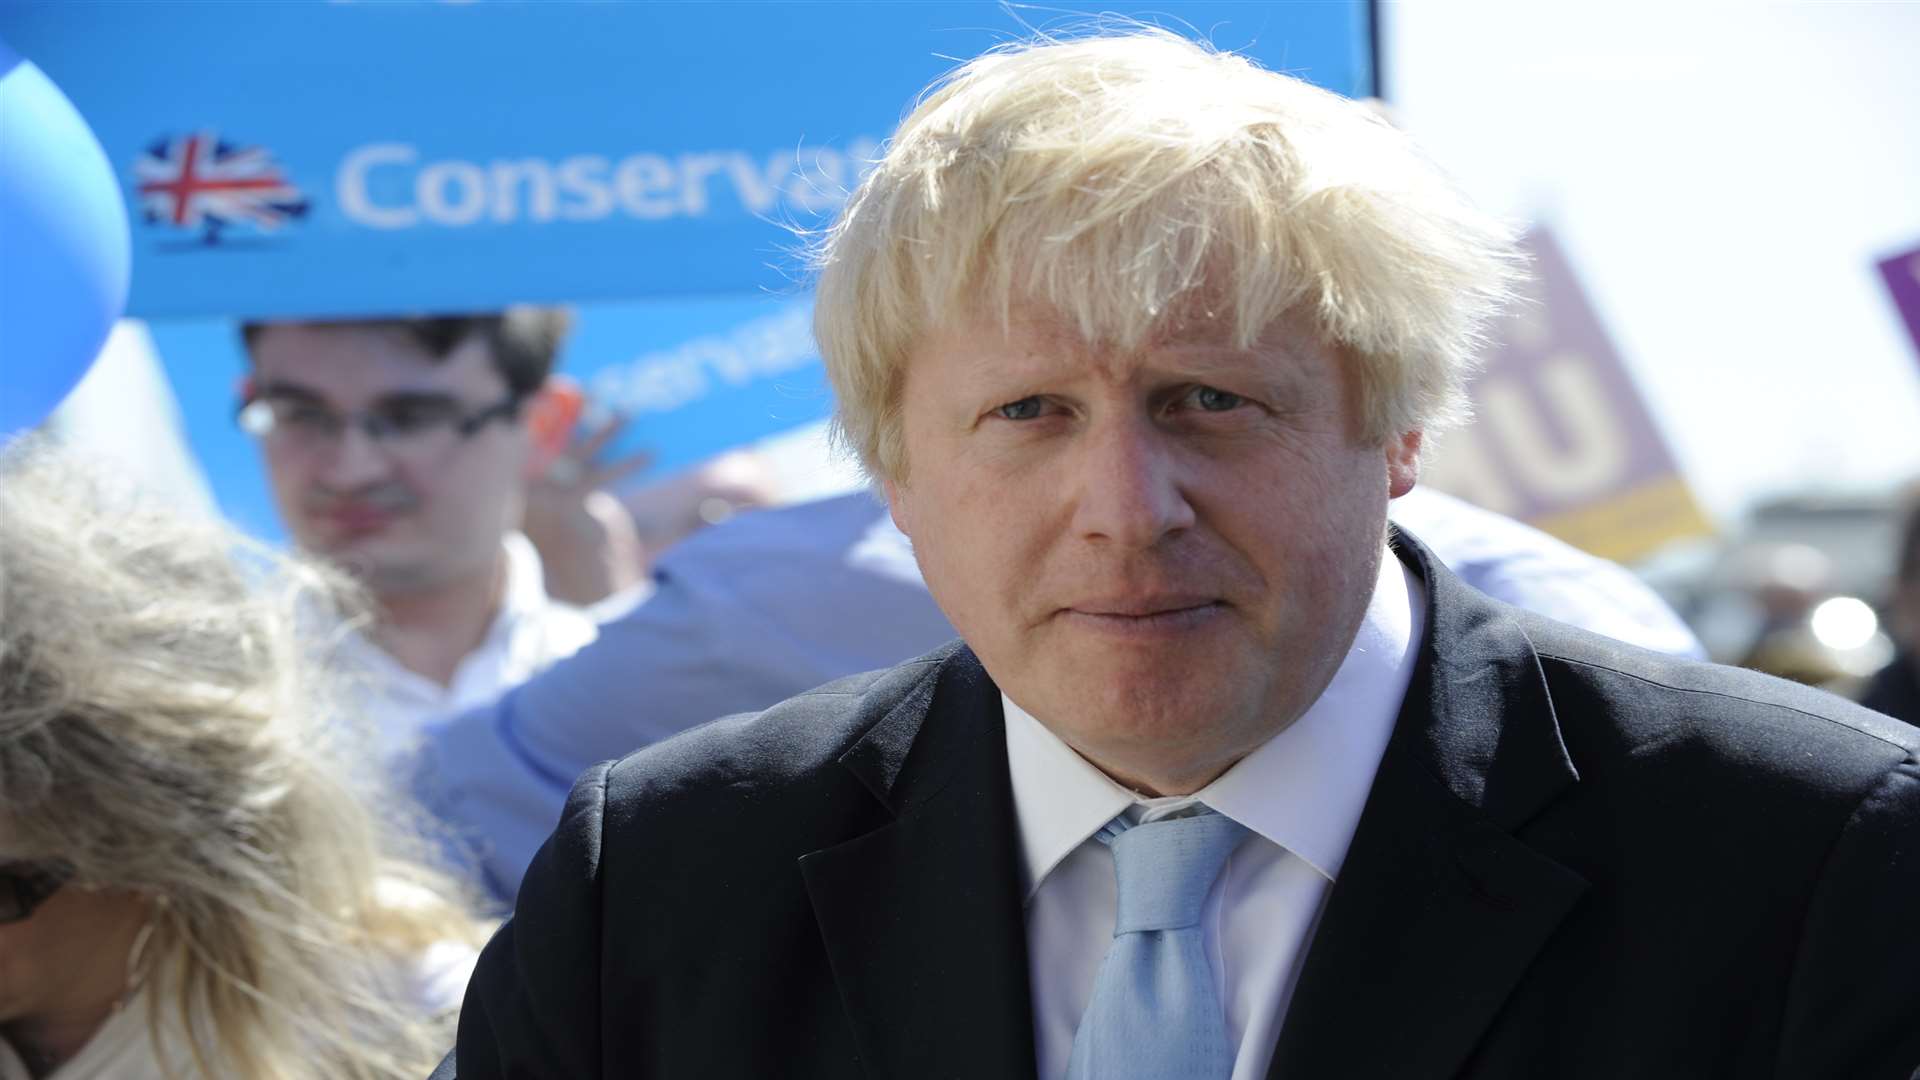 Boris Johnson described MPs' appearances on Russia Today as "a scandal"